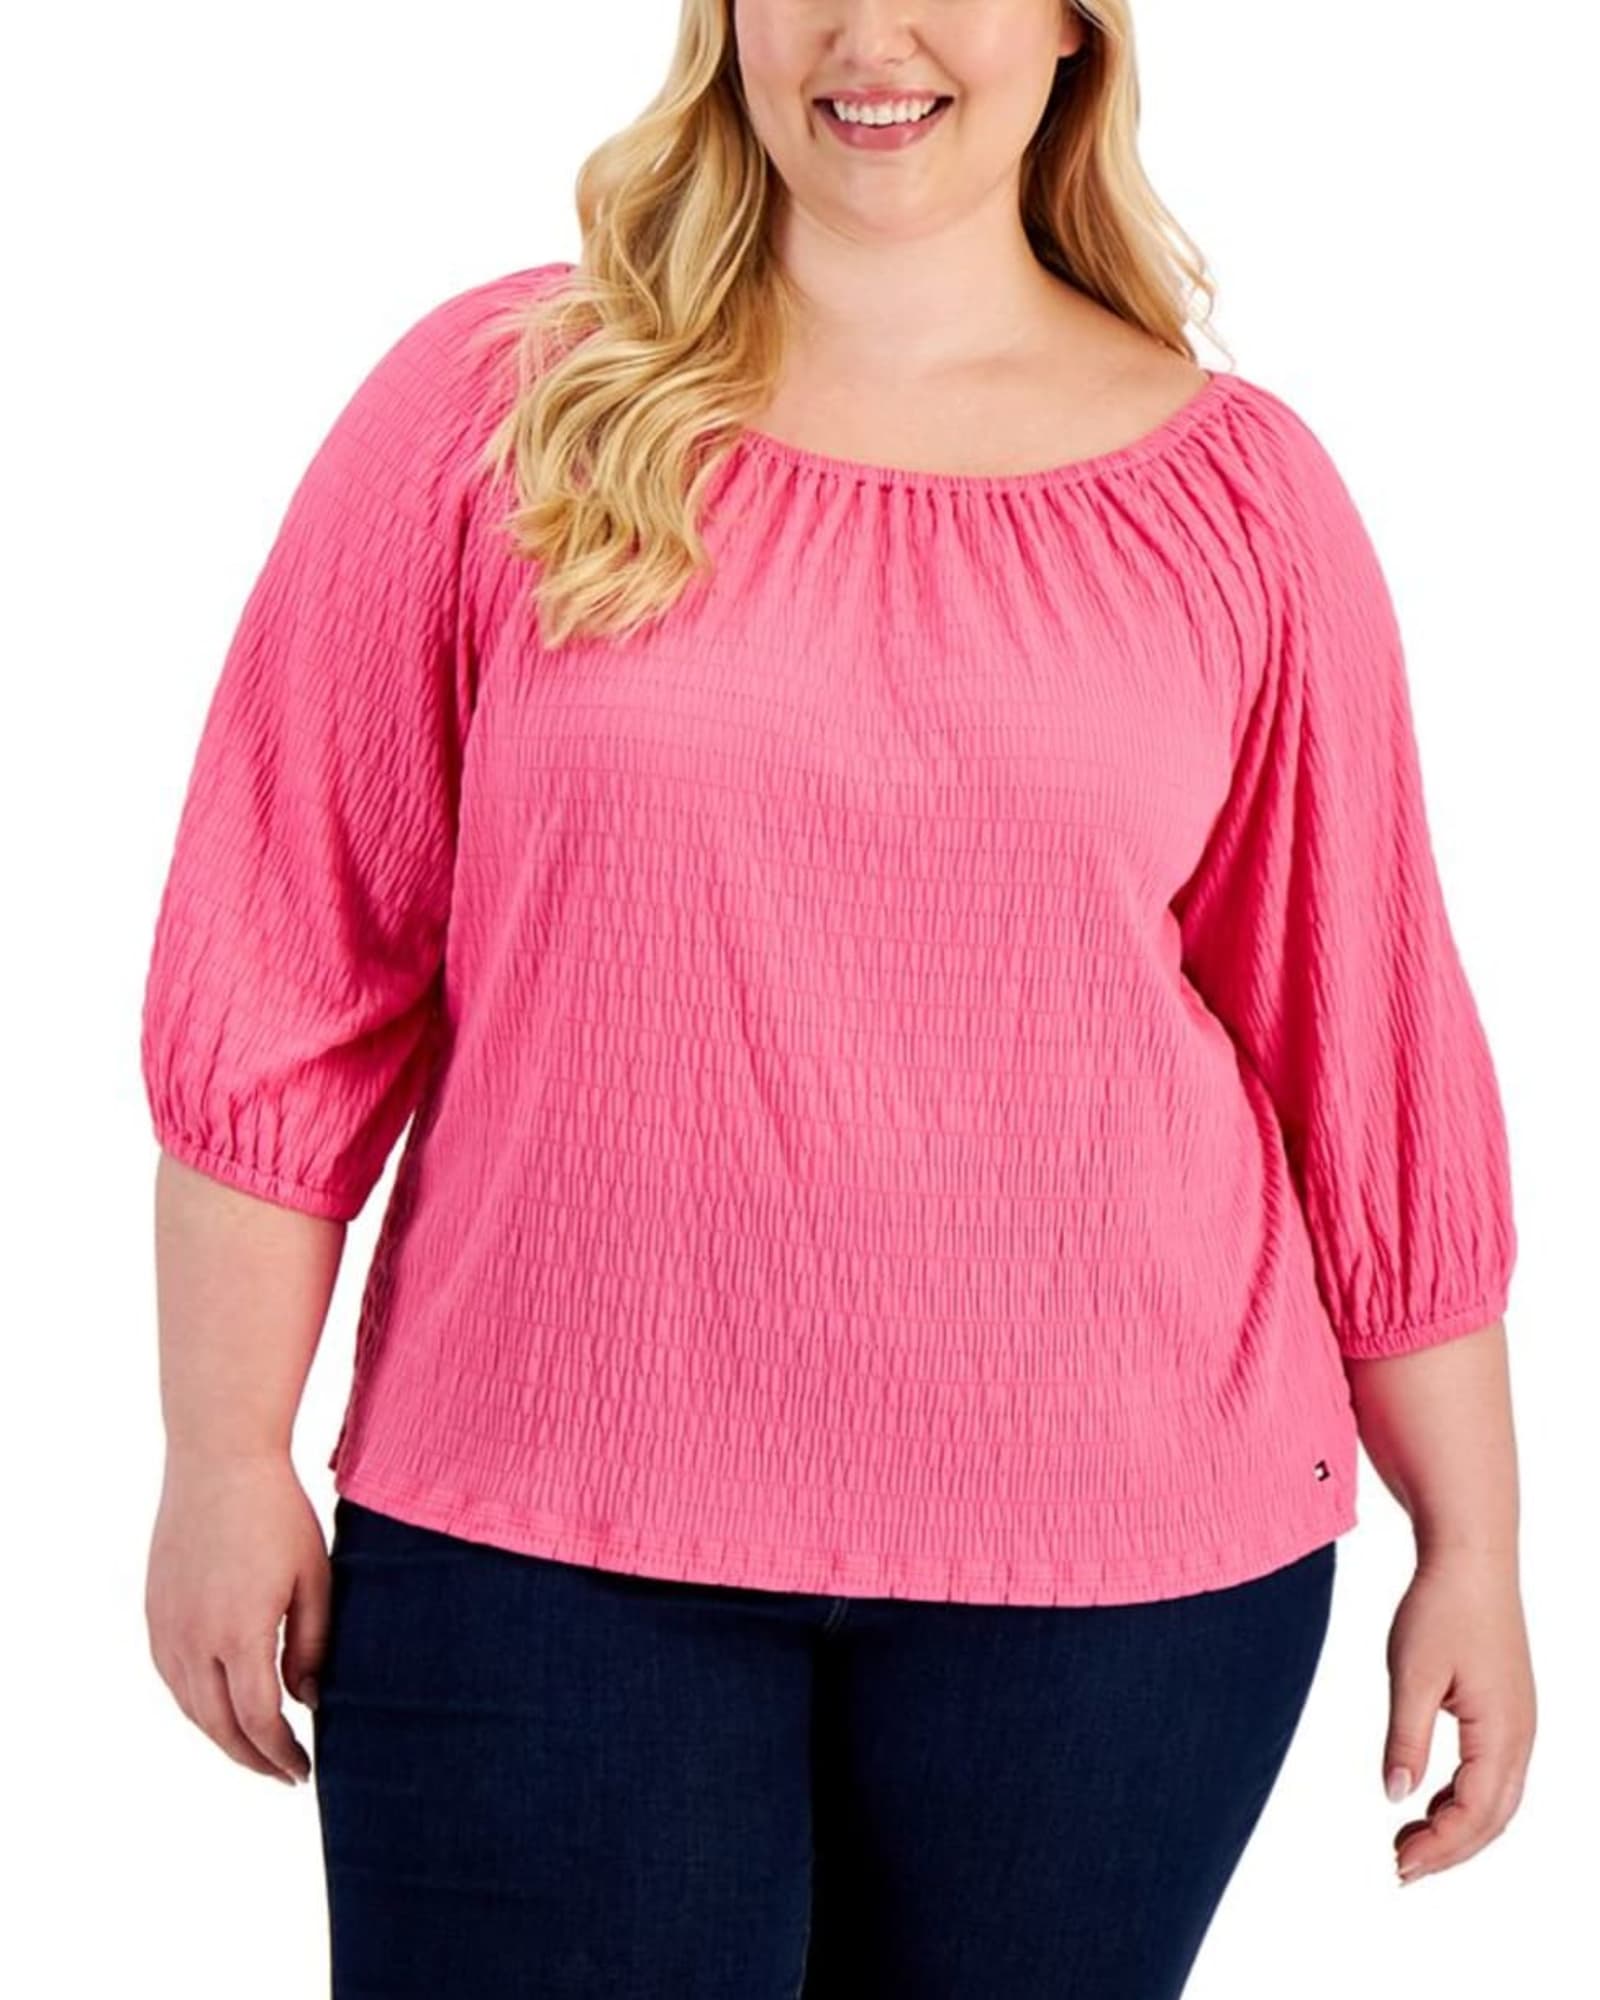 Slimming Tops For Plus Size